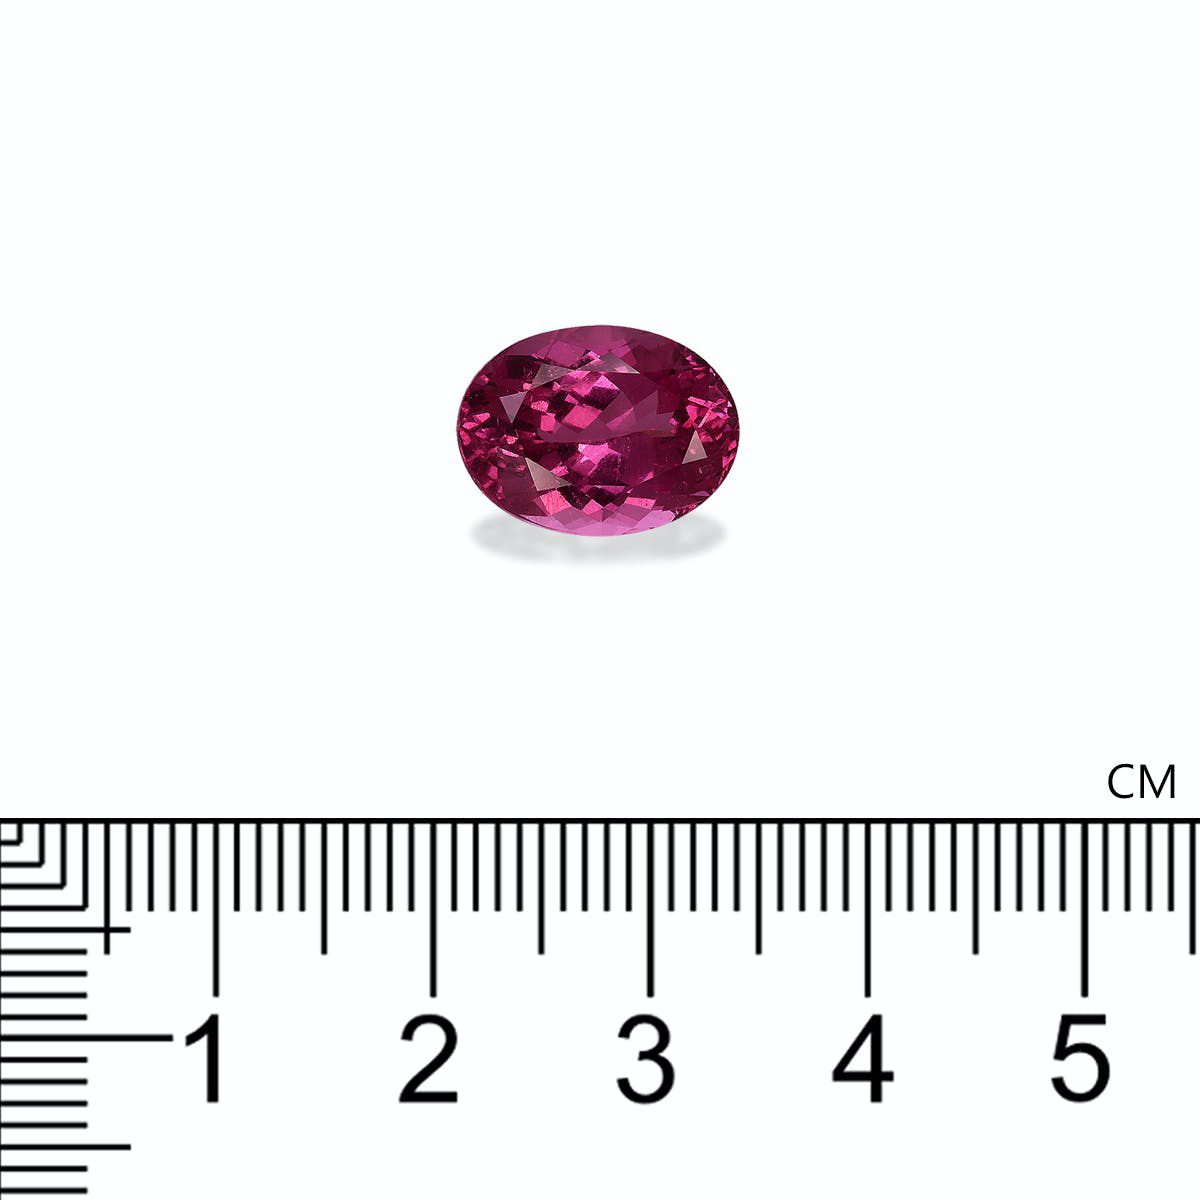 Picture of Vivid Pink Spinel 6.84ct (SP0057)